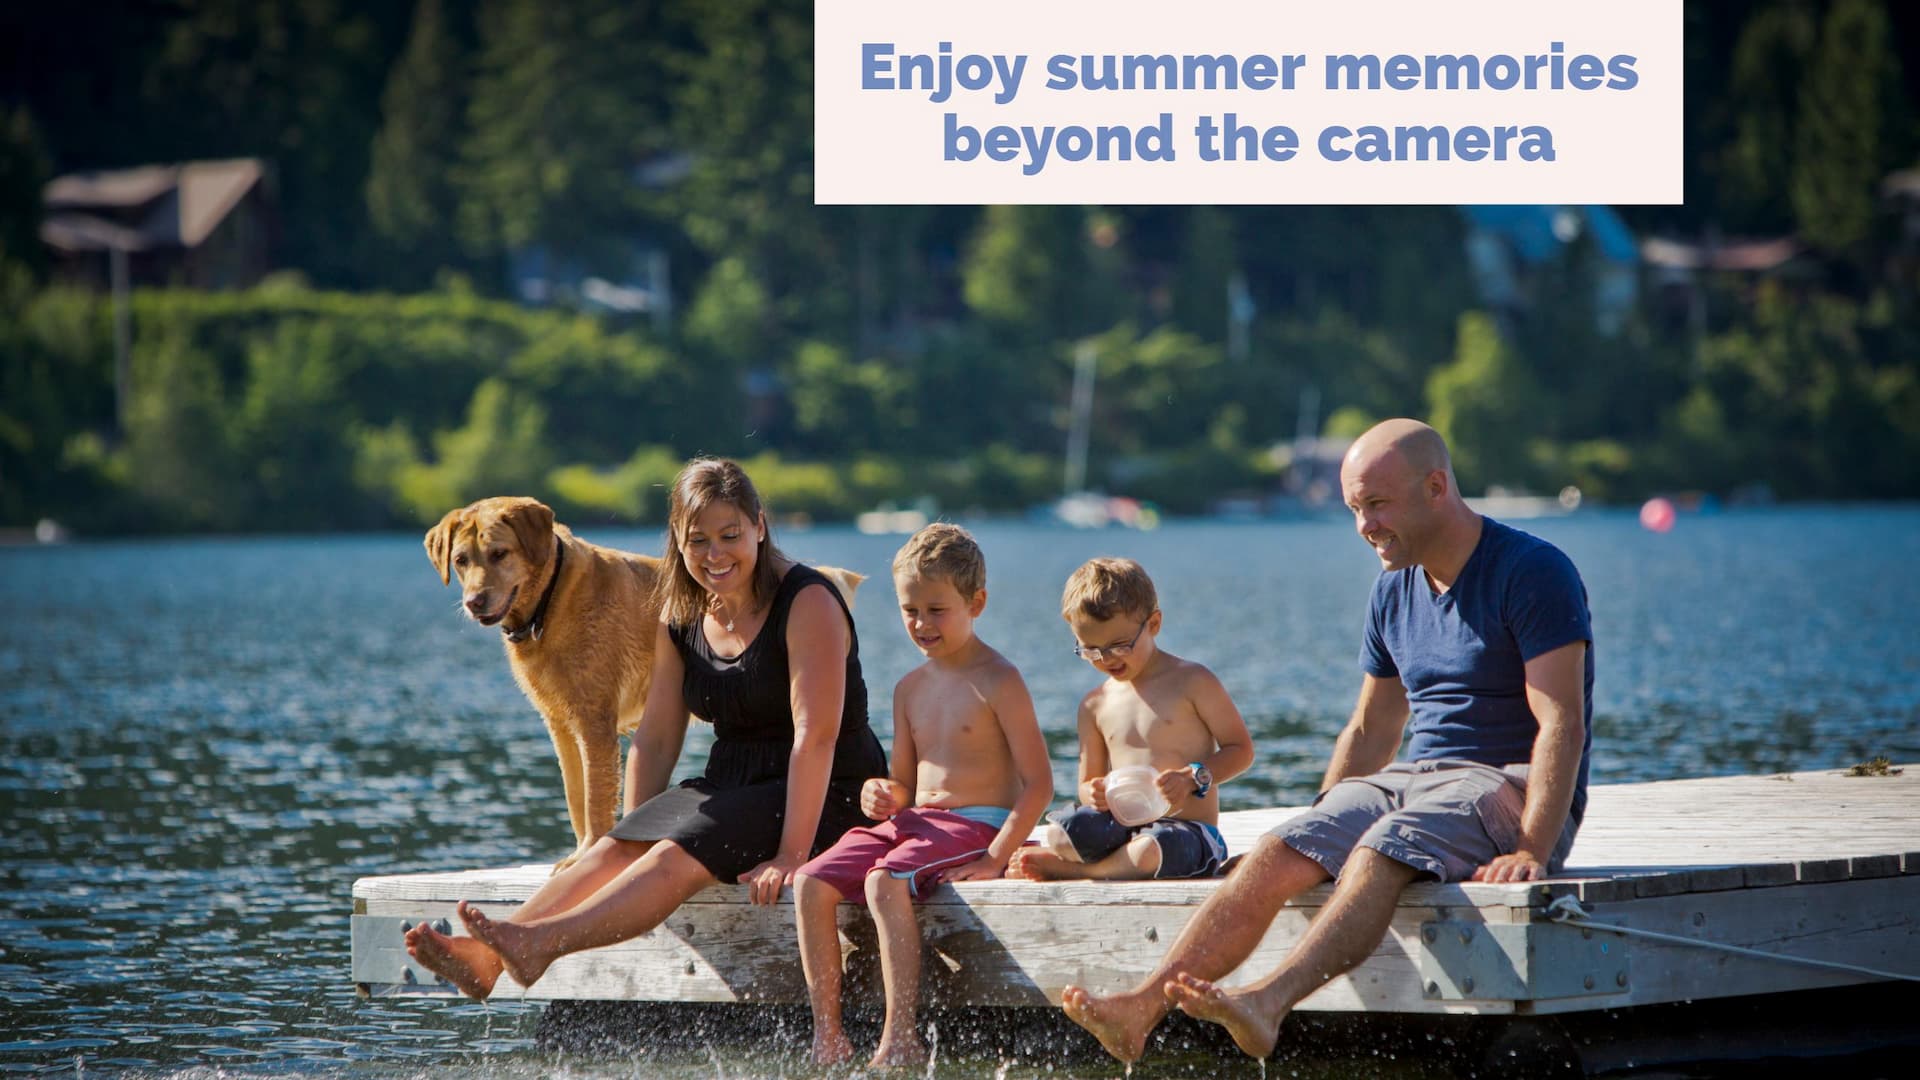 Want memories of your summer vacation? Take fewer photos and engage all your senses.